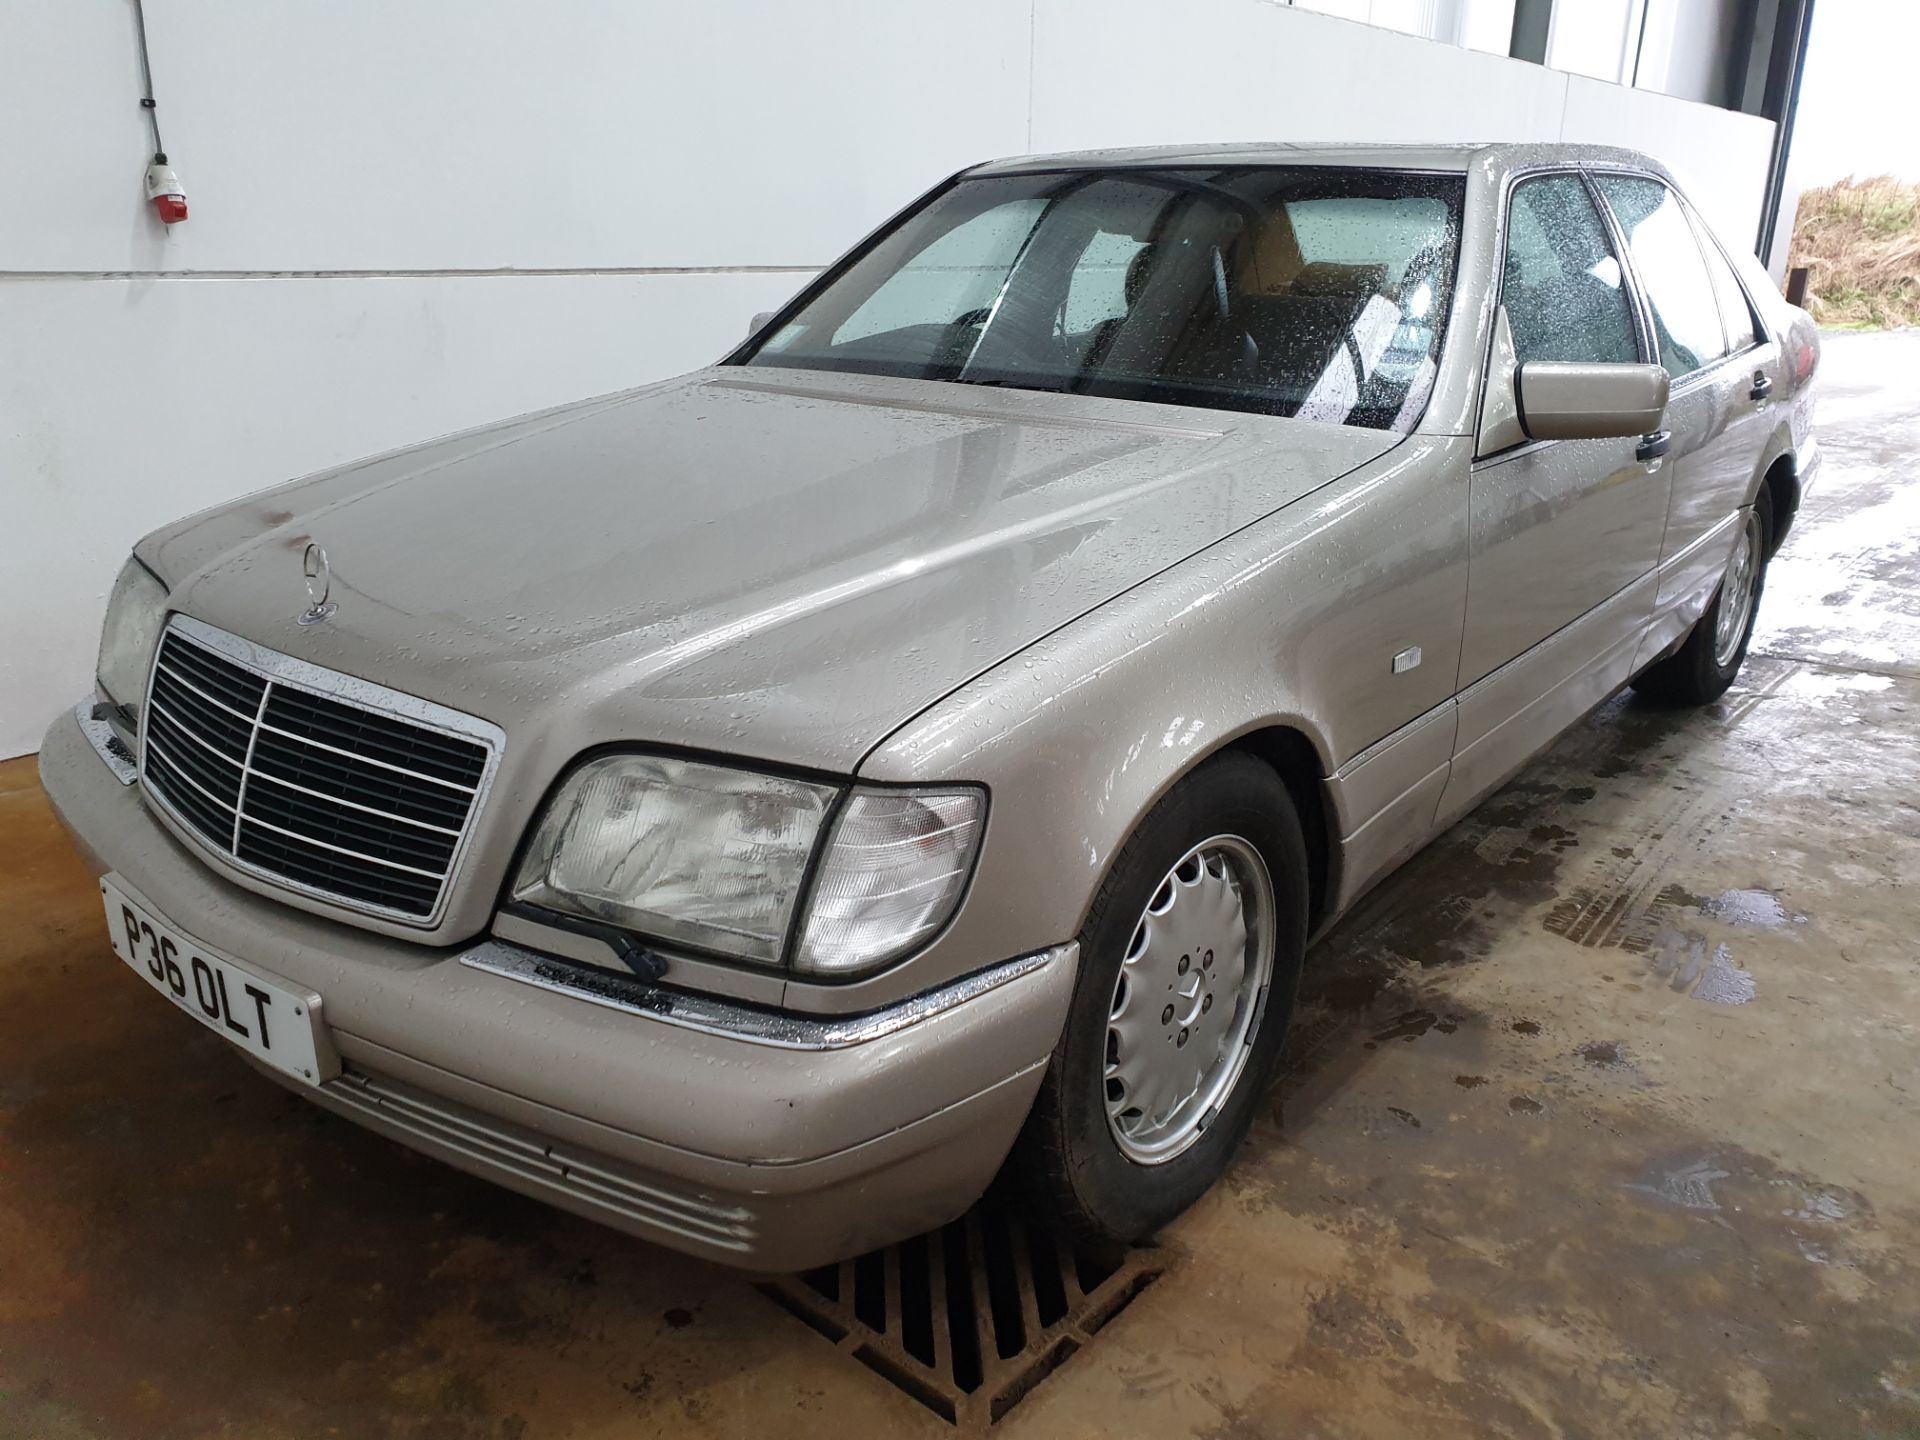 1996 Mercedes S320 - Image 7 of 16